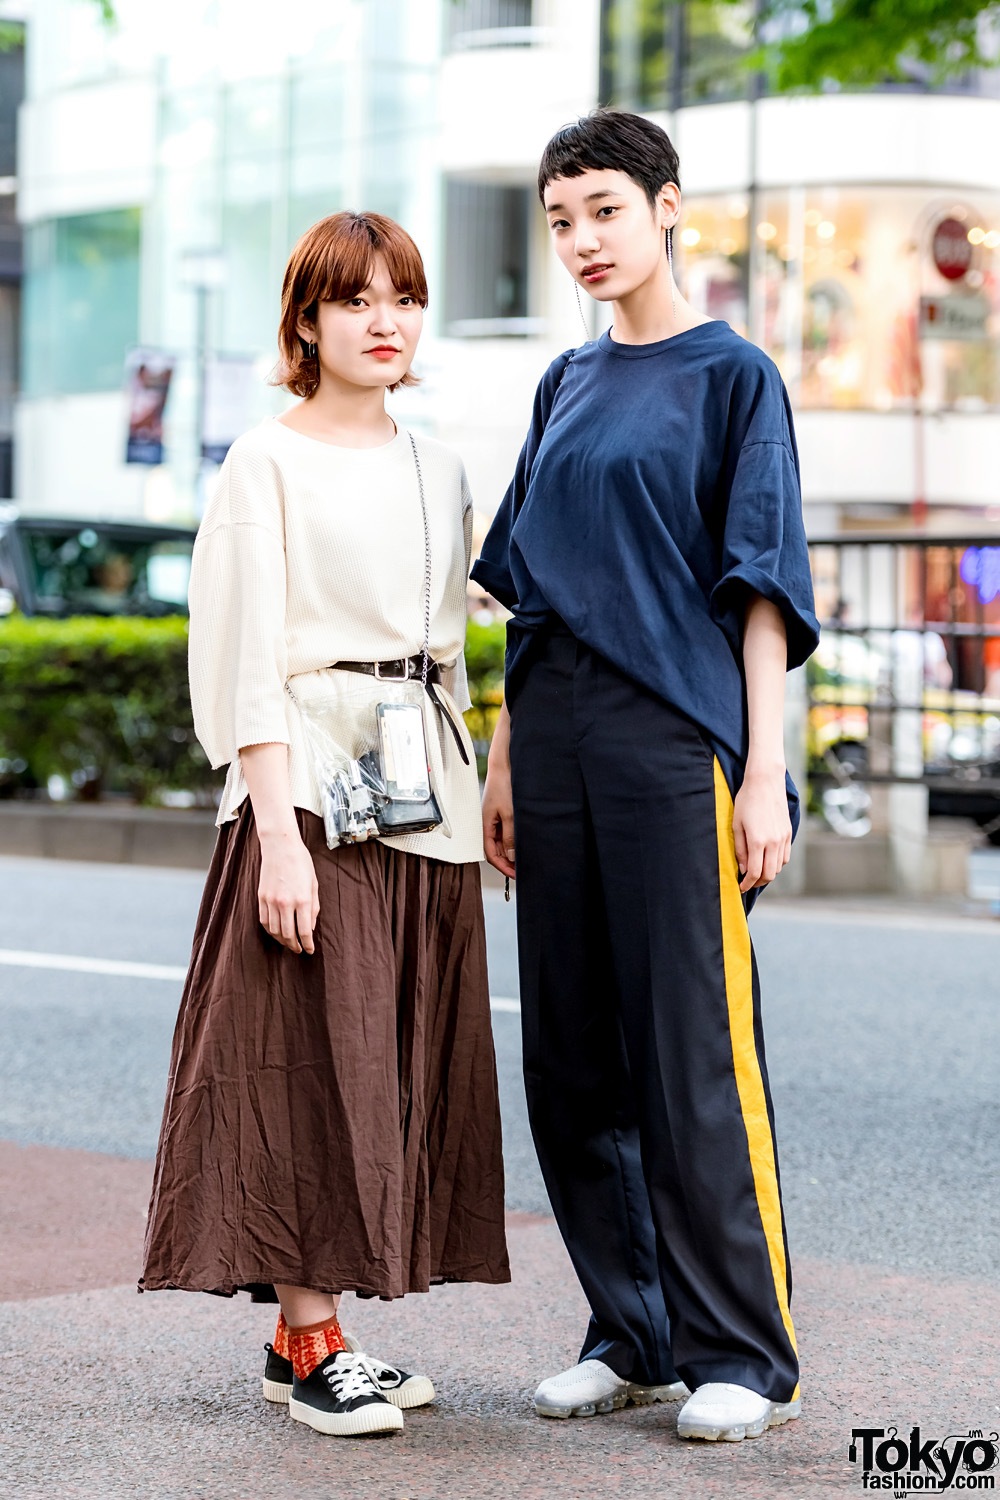 Japanese Girls in Minimalist Street Styles w/ Universal Overall T-Shirt, 3/4 Sleeve Top, Suede Sneakers & Sling Bags